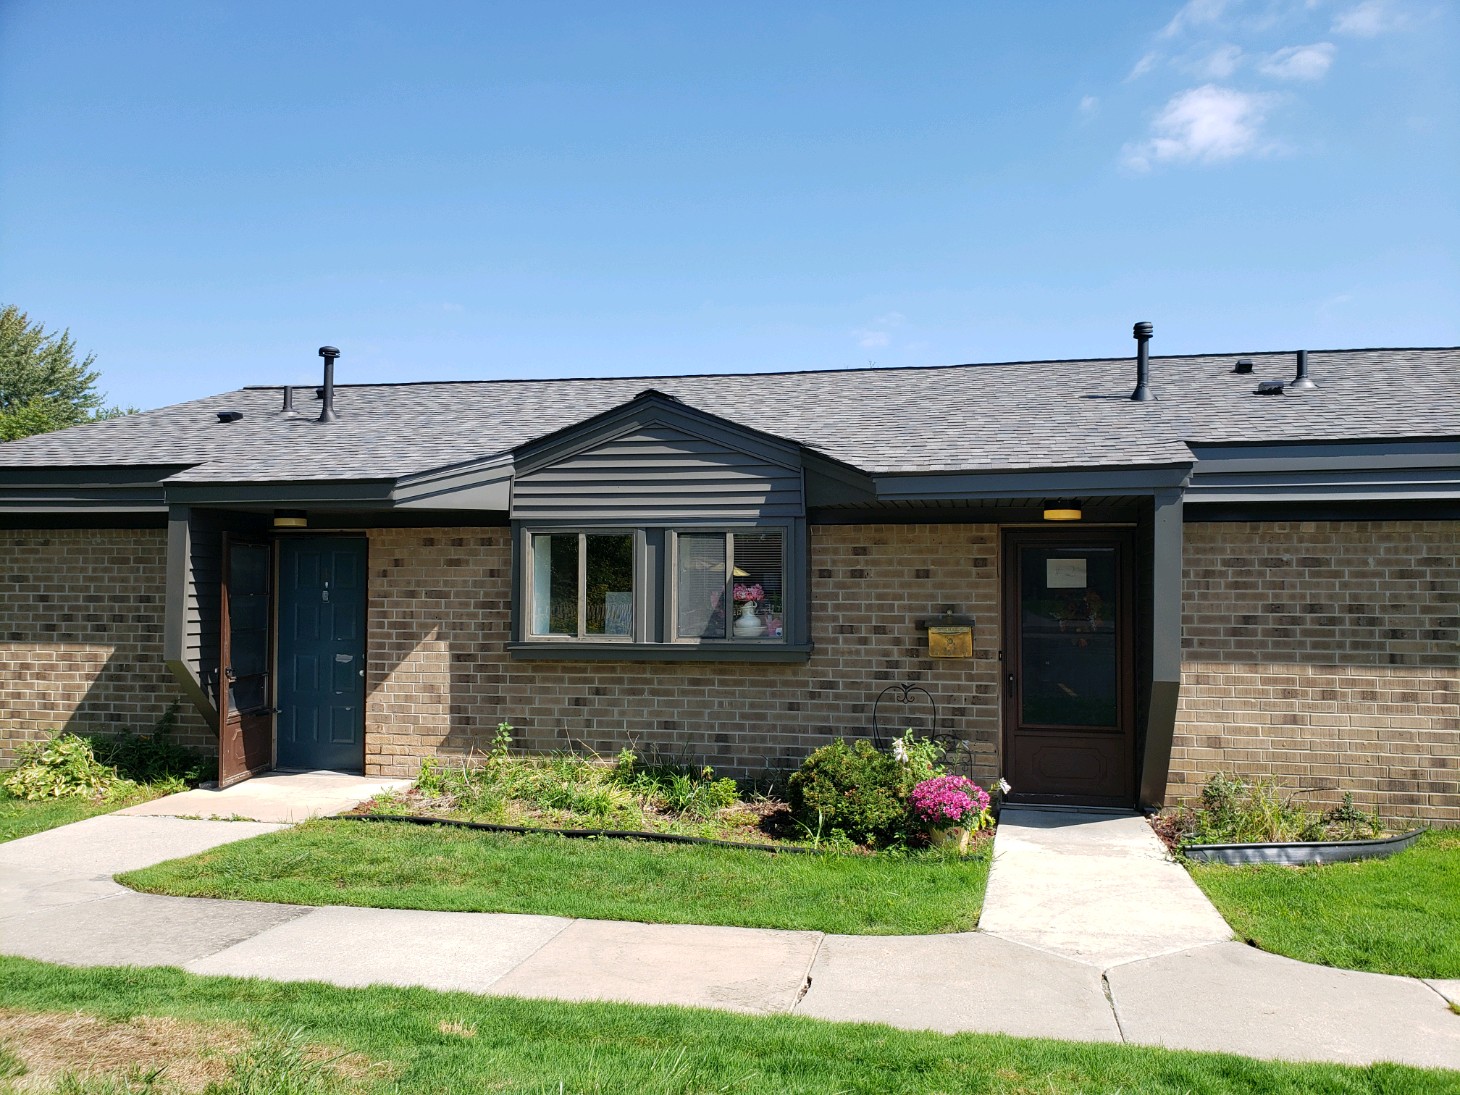 Roofing, siding, trim, and gutter updates